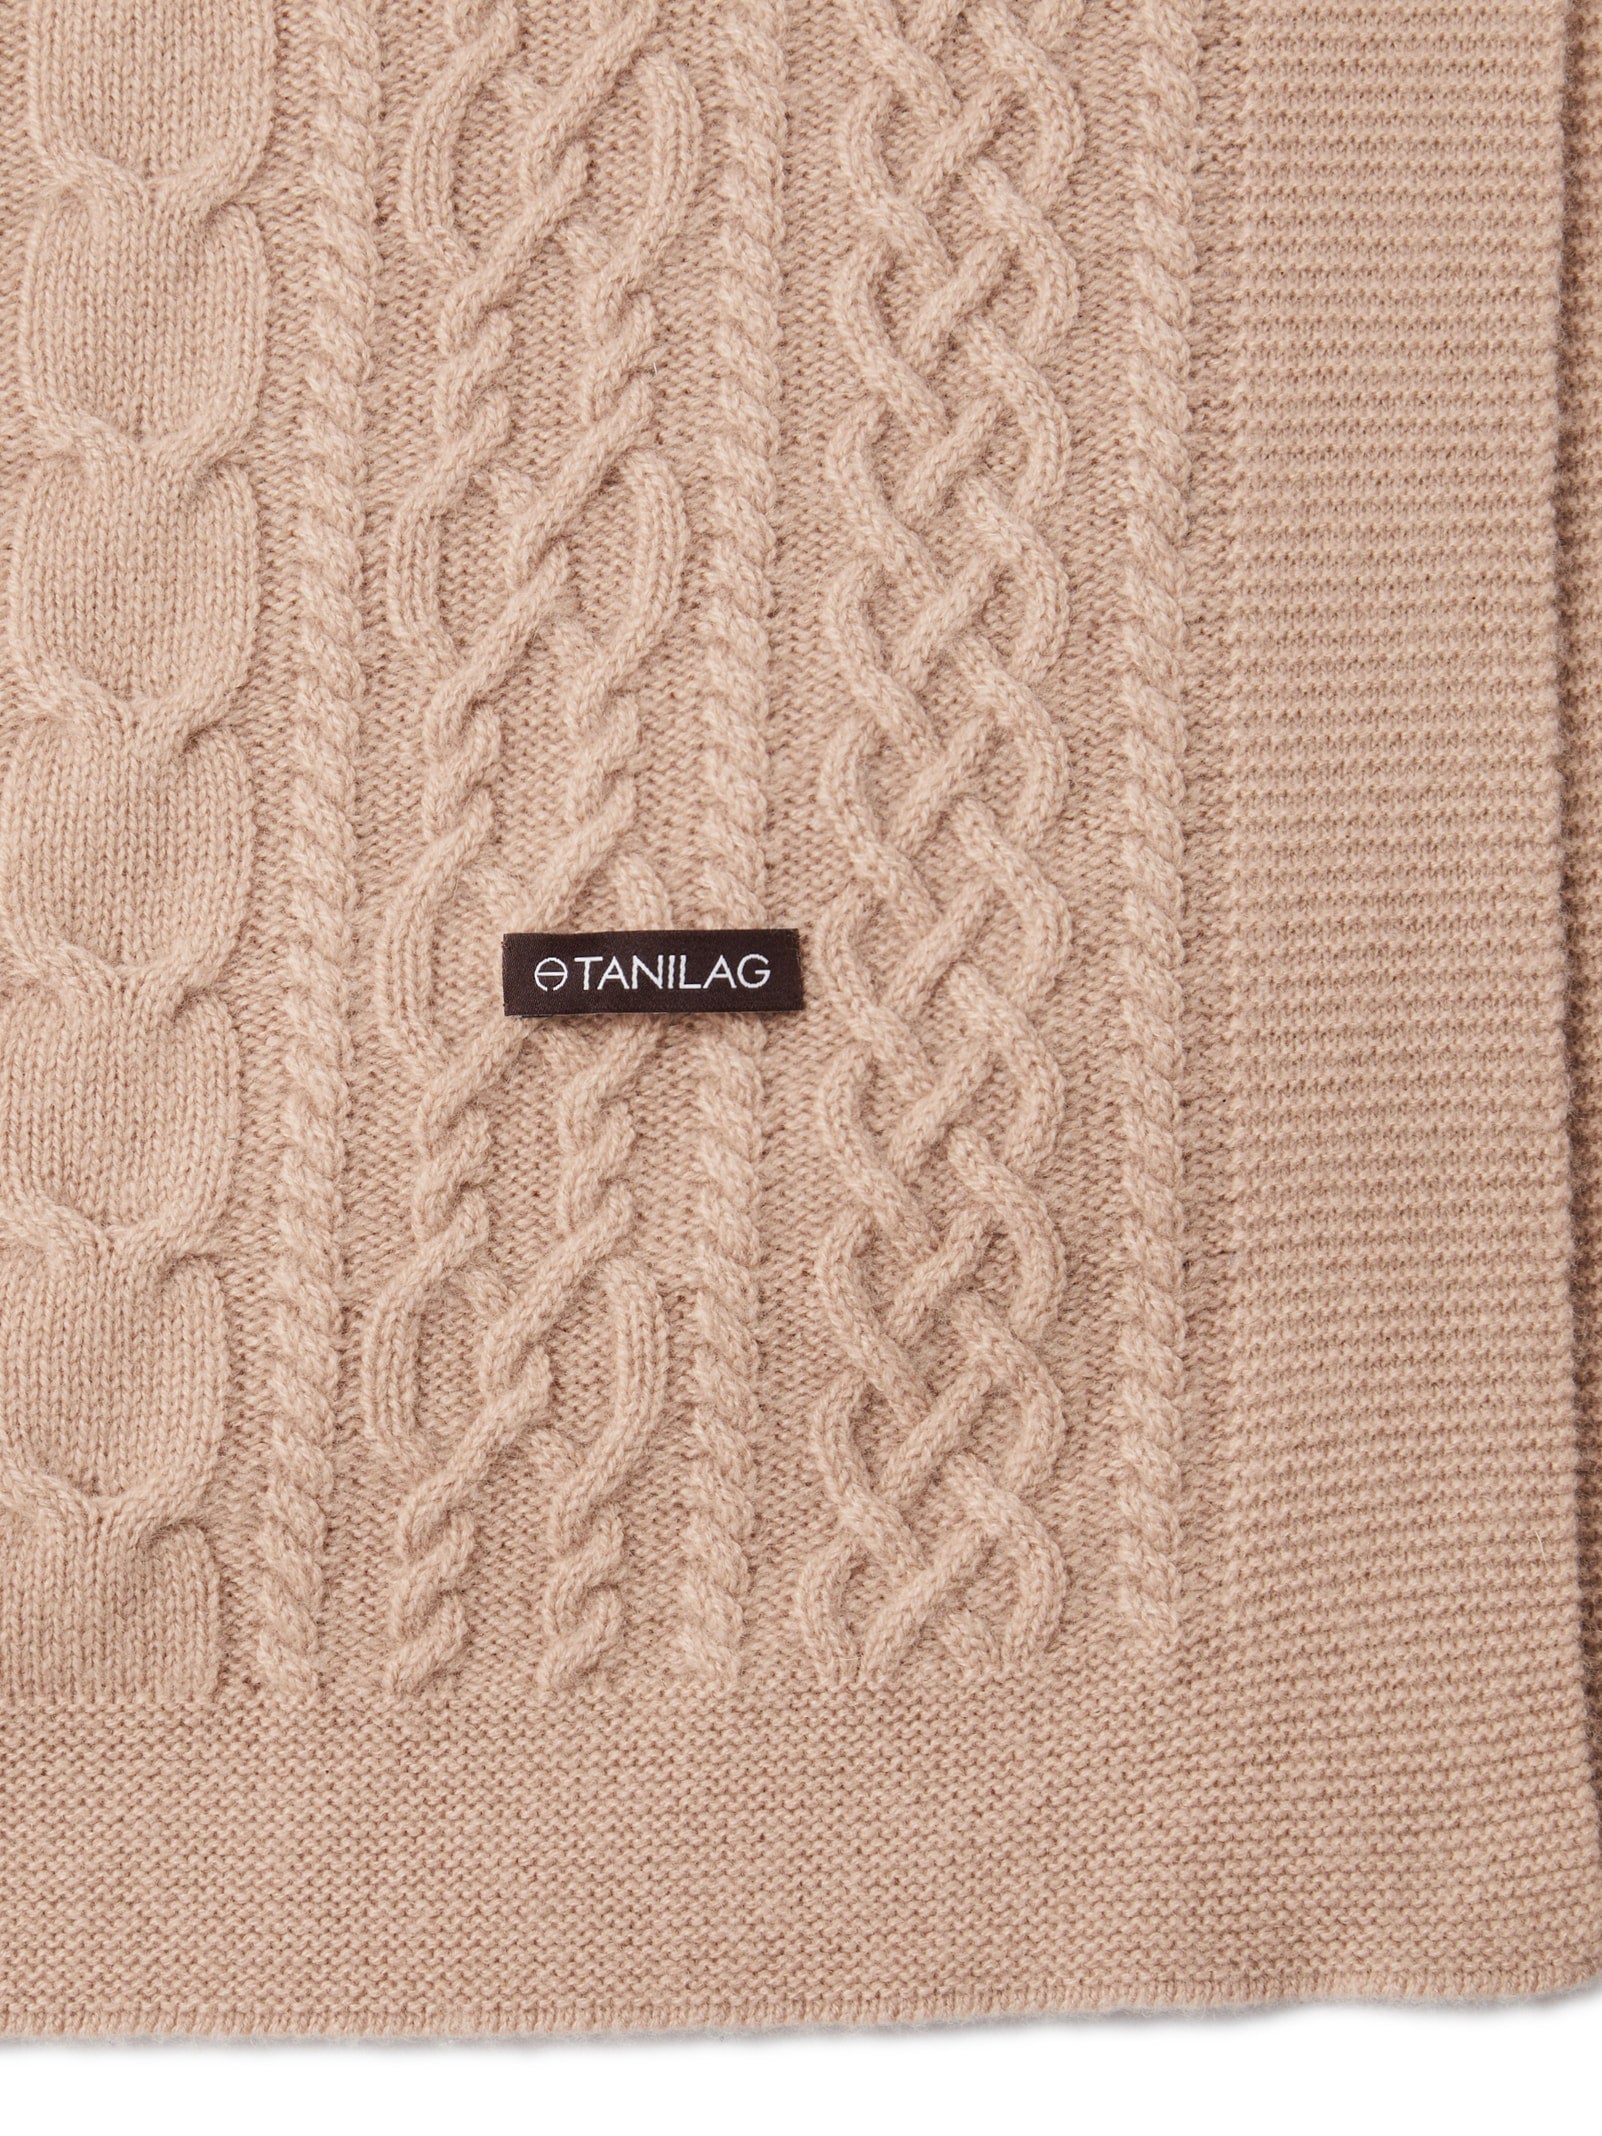 CABLE CASHMERE BLANKET